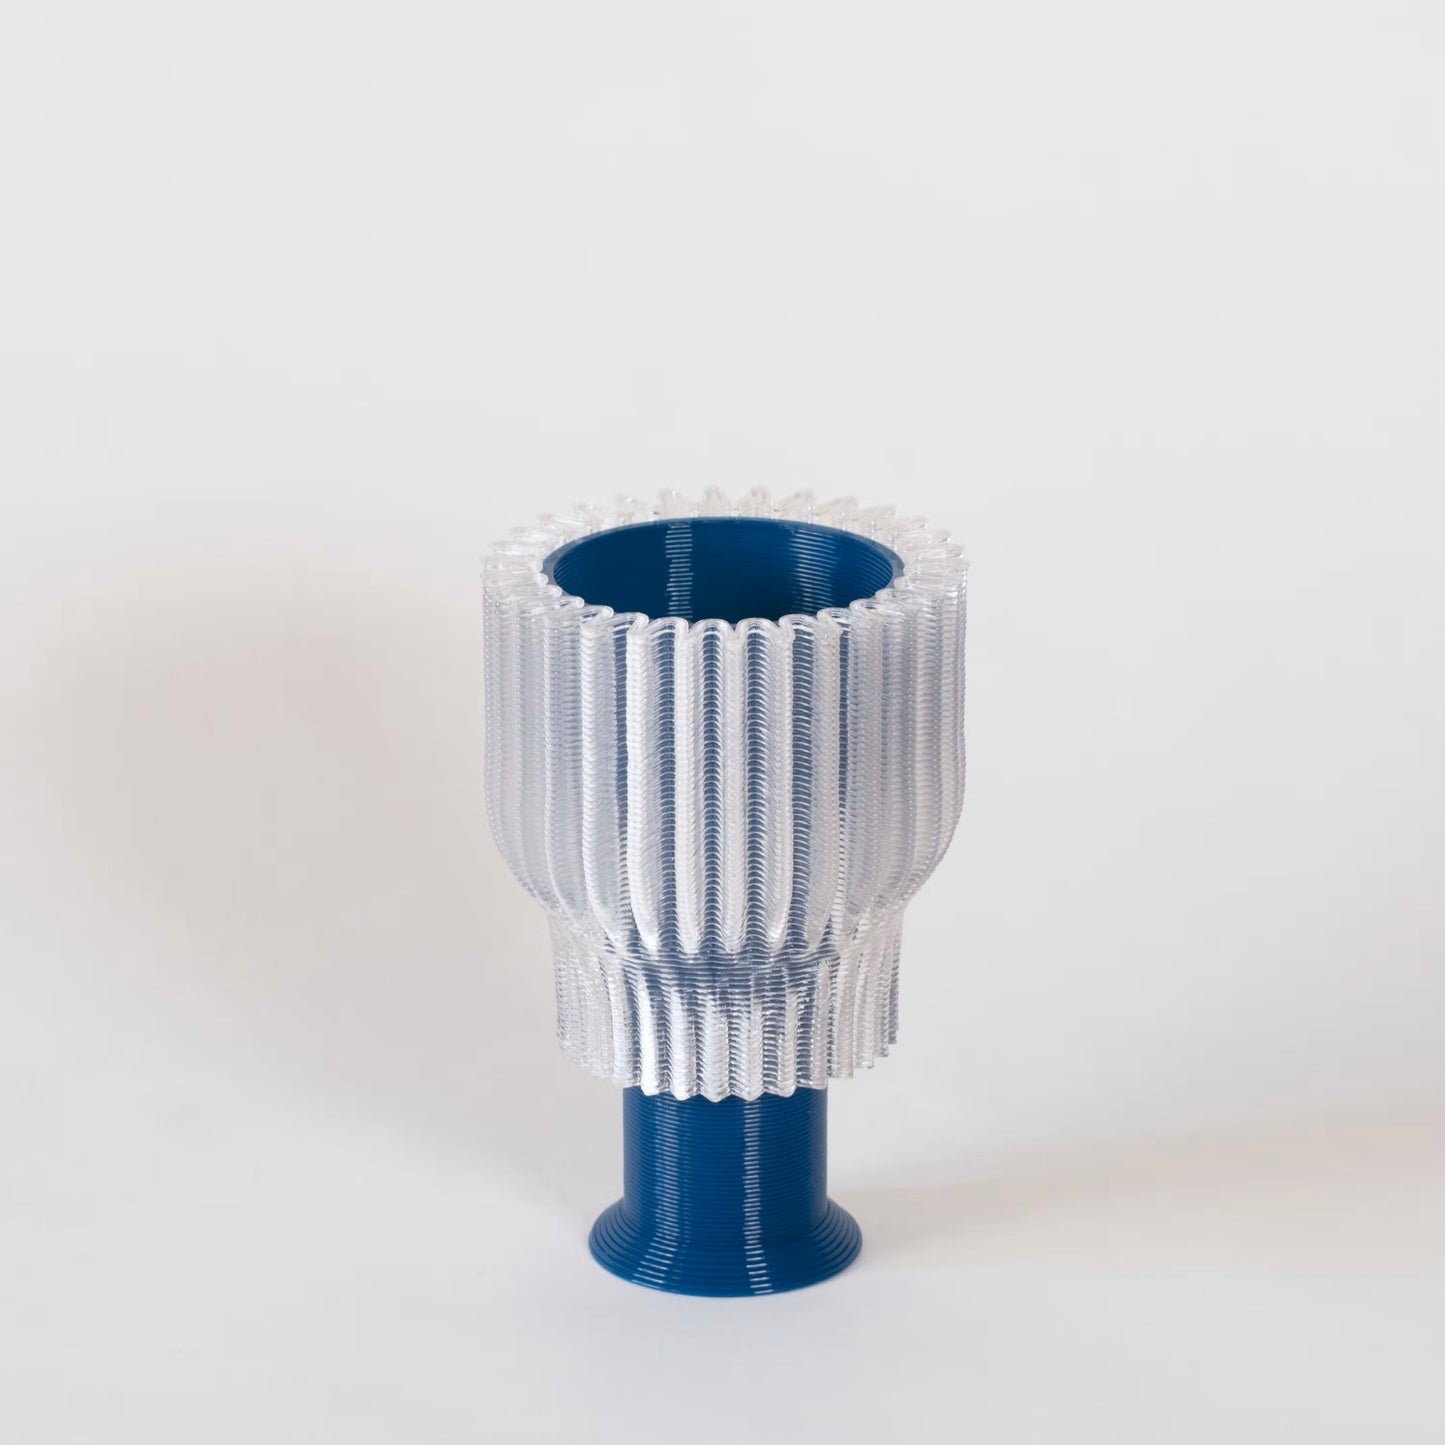 Double candle holder 2.21.2 | Blue oil